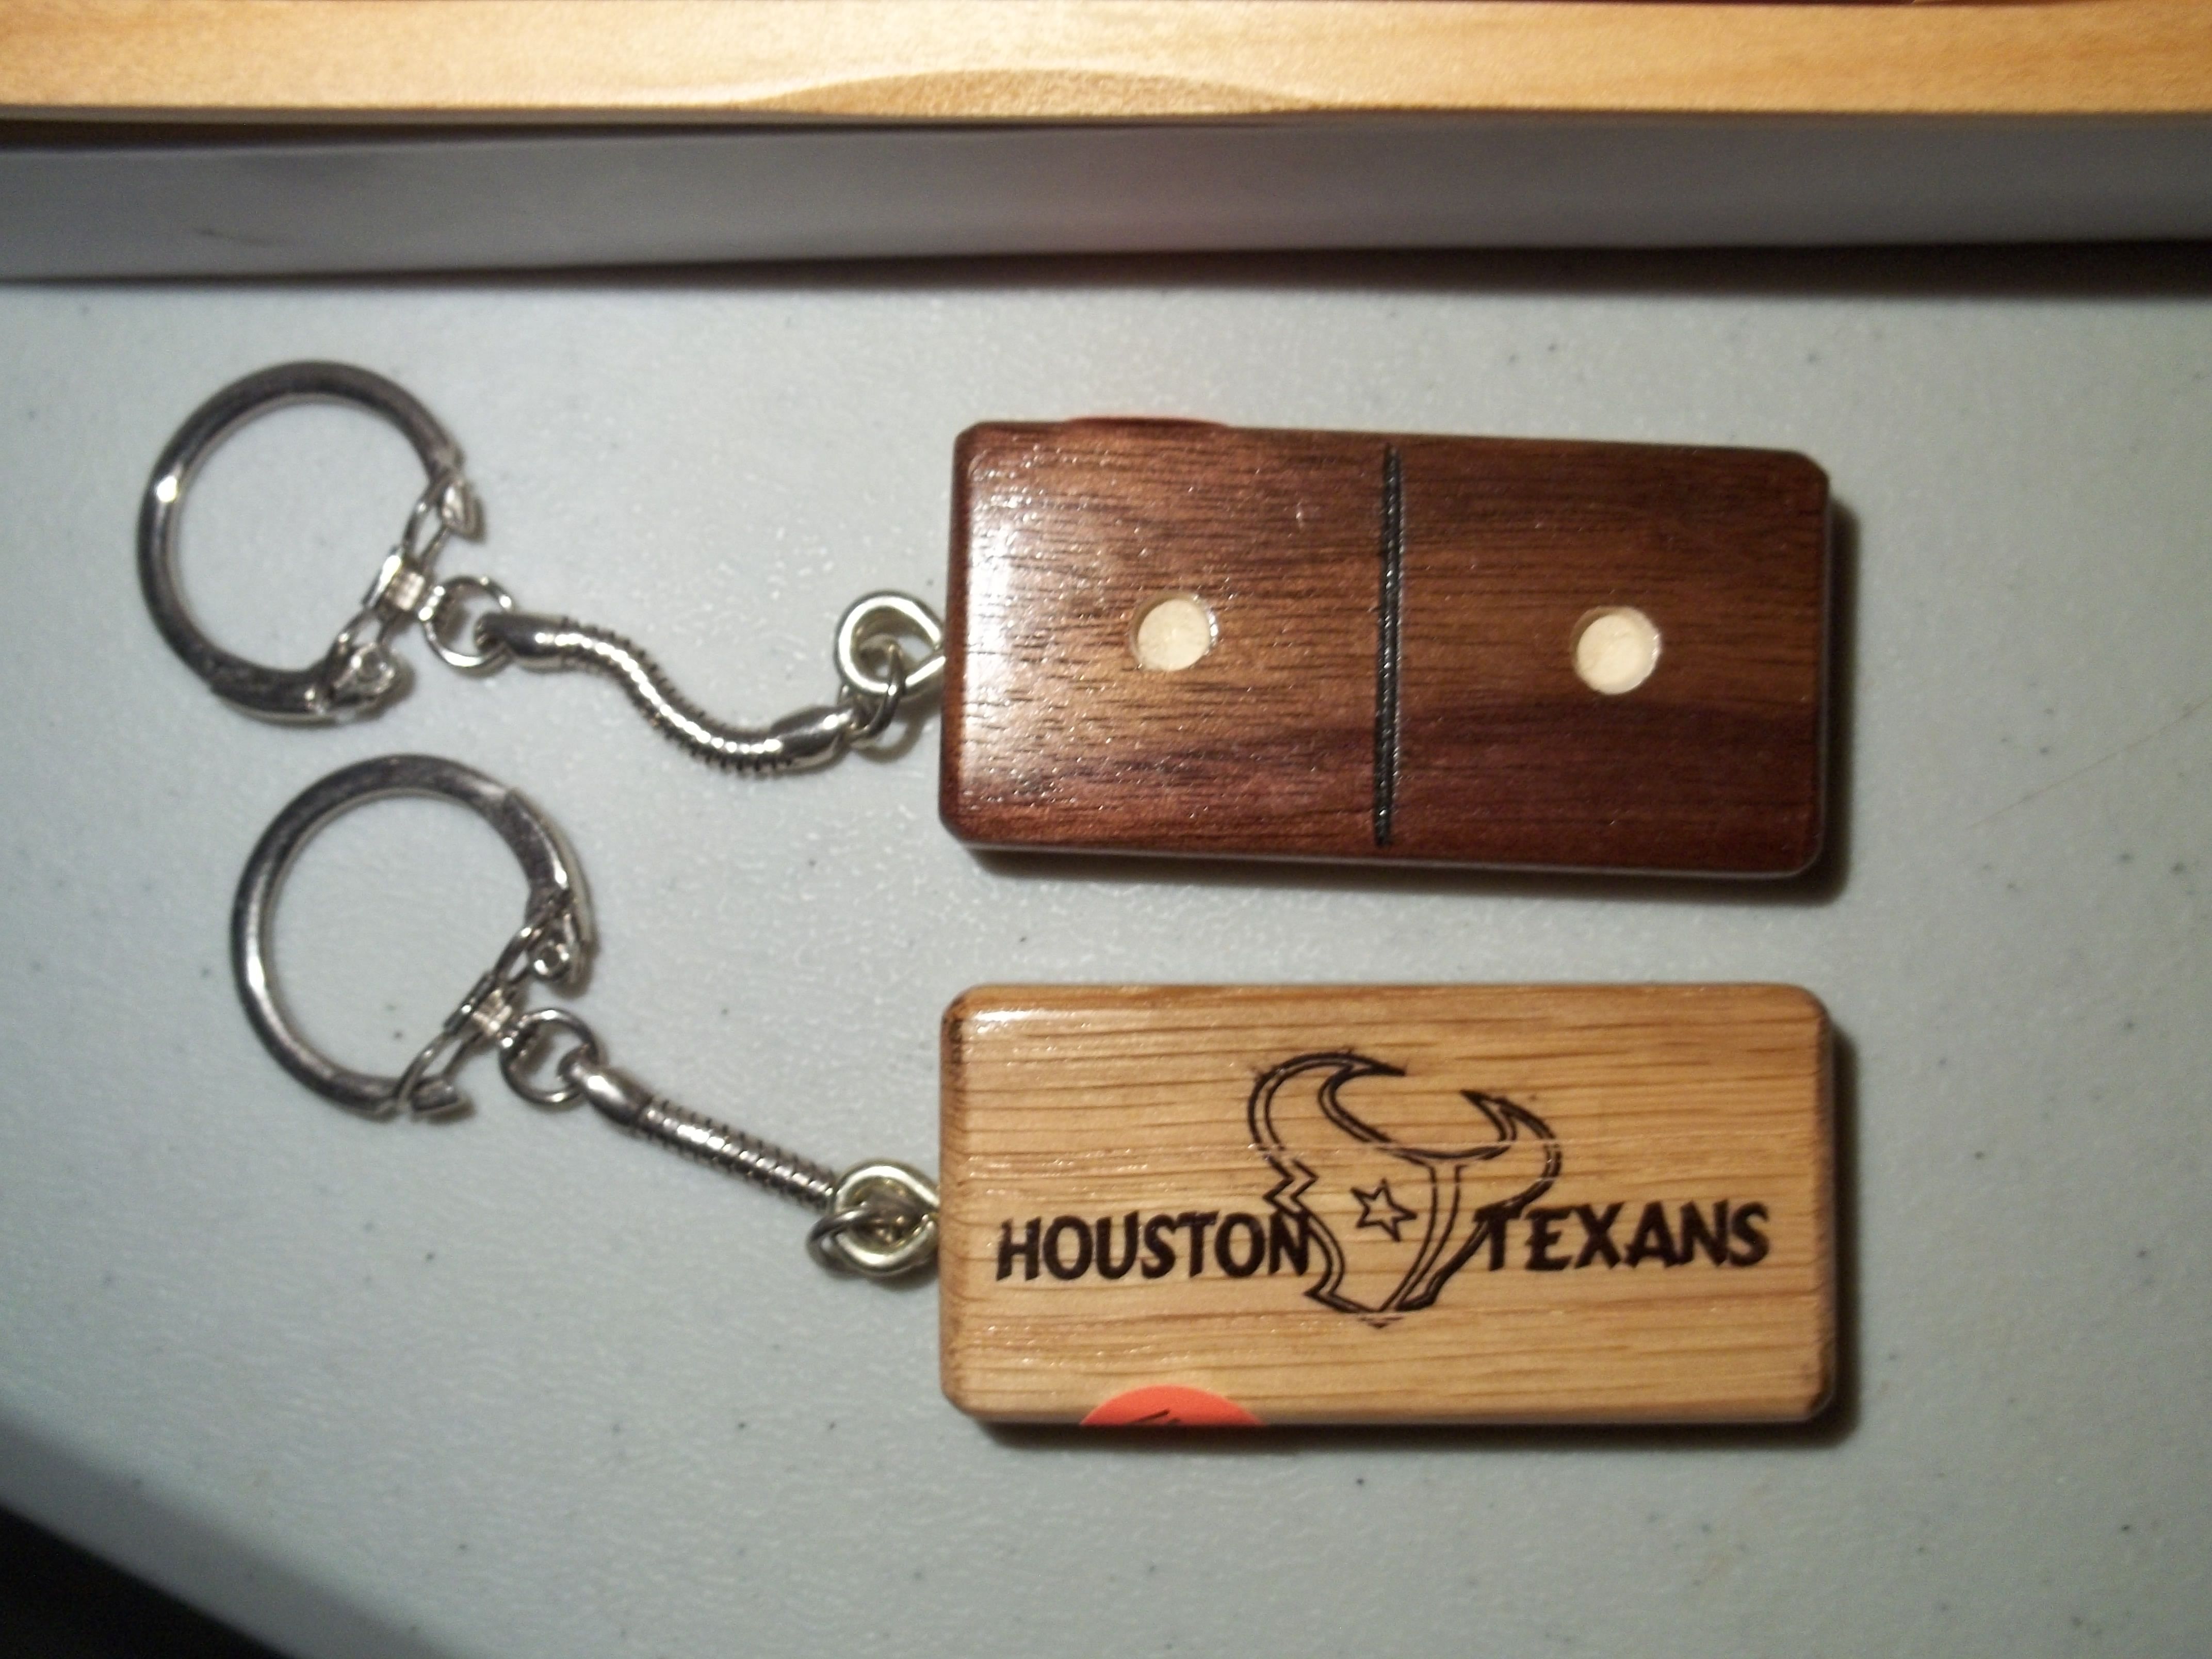 Handcrafted pick door with key ring